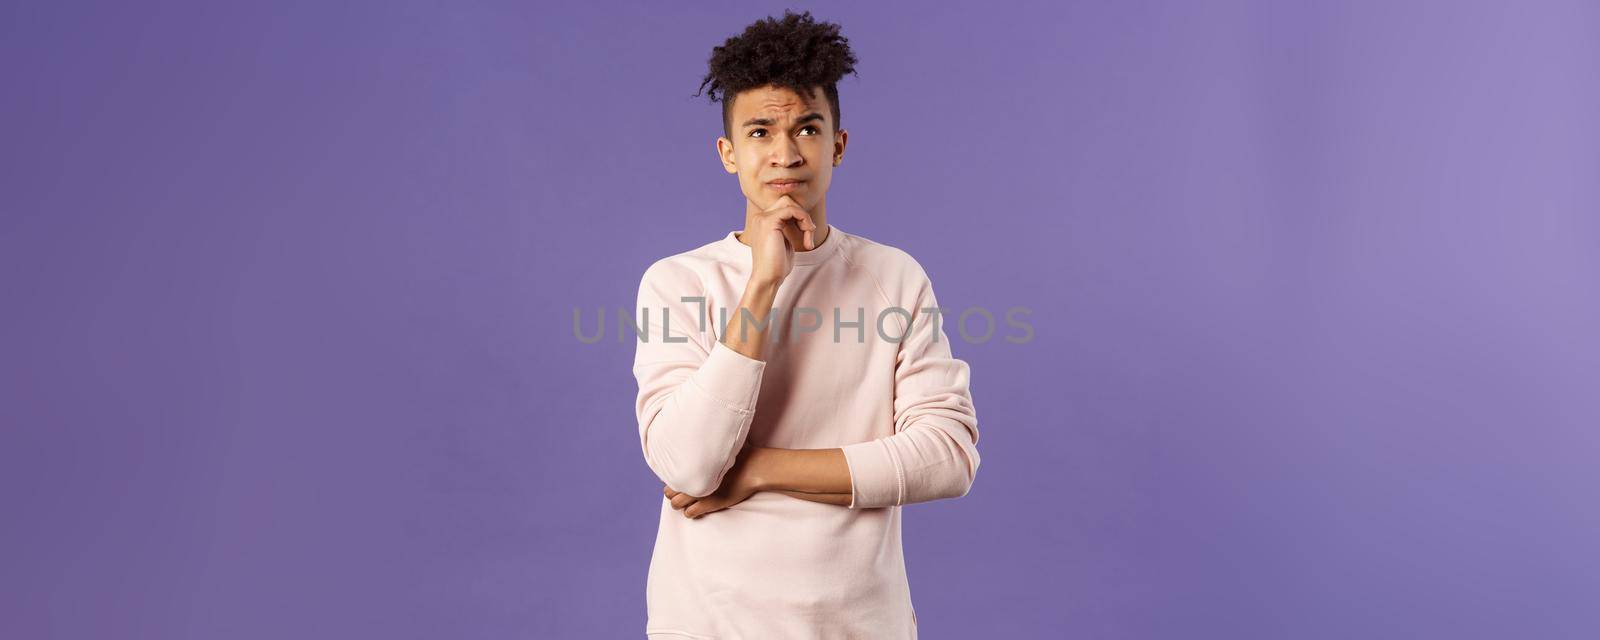 Portrait of complicated, young thoughtful man with dreads, look troubled up, thinking what to do, standing indecisive, grimacing not knowing answer, facing hard choices, purple background.